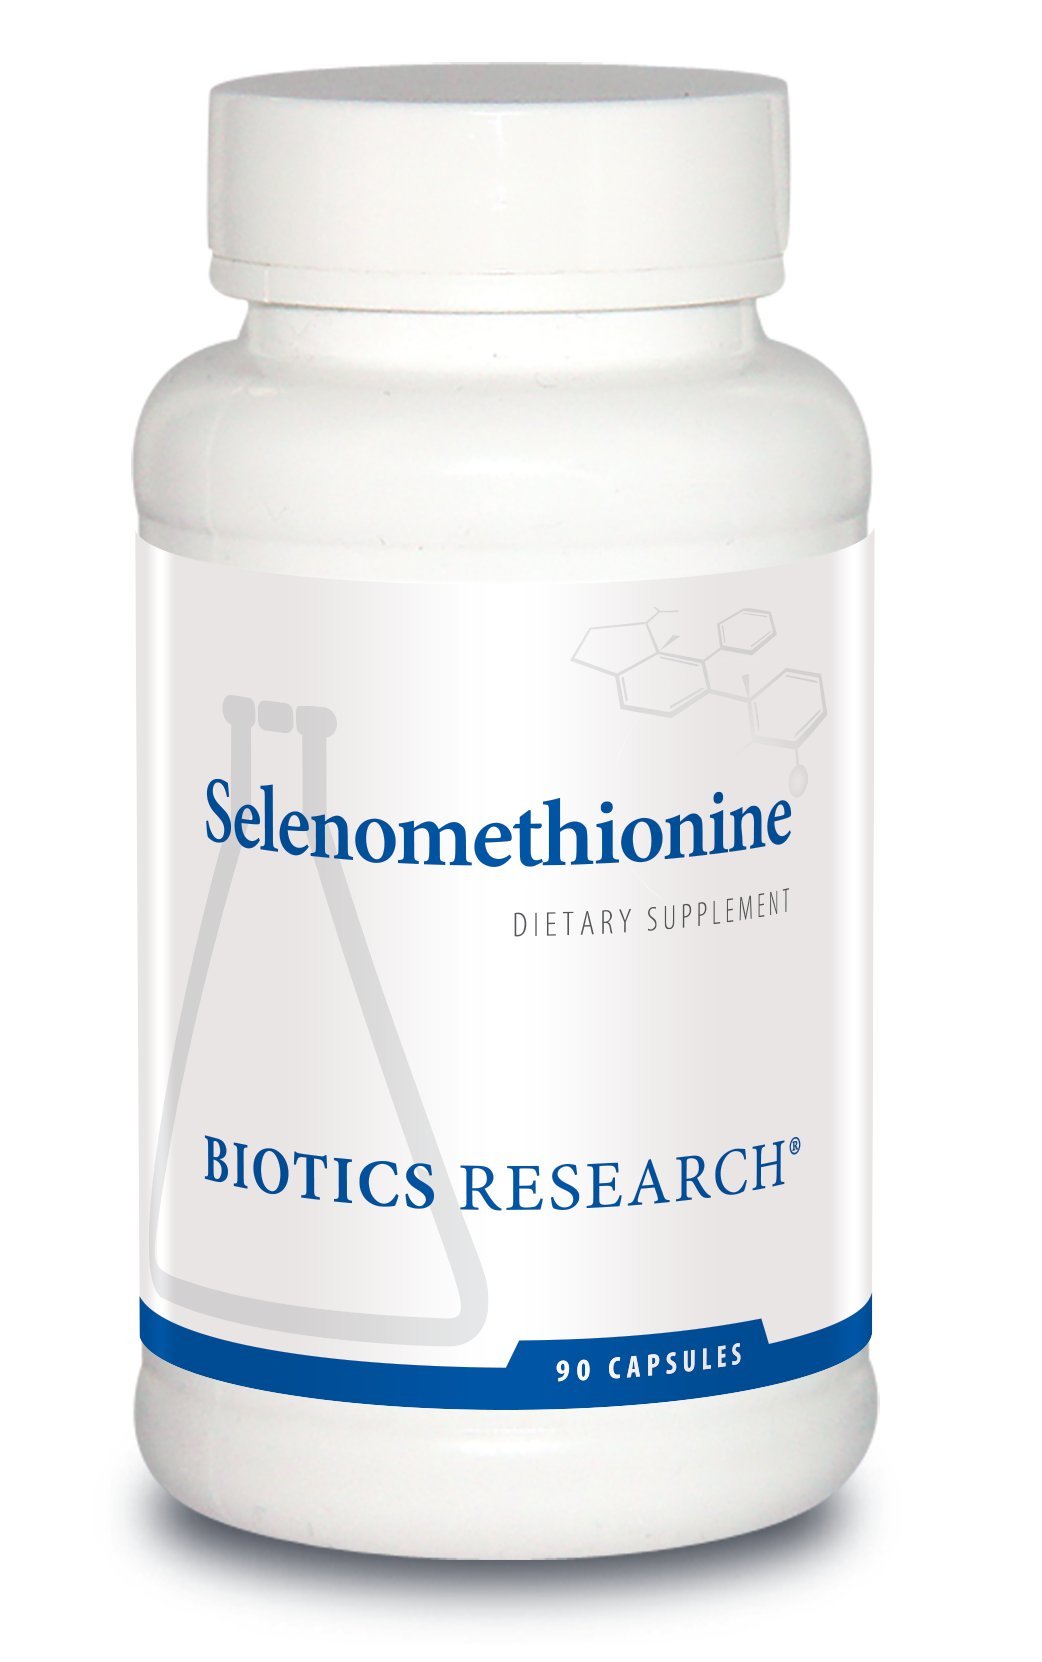 Biotics Research Selenomethionine – High Potency Selenium, Reproduction, Thyroid Gland Function, DNA Production, Cognitive Health, Potent Antioxidant. 90 Capsules